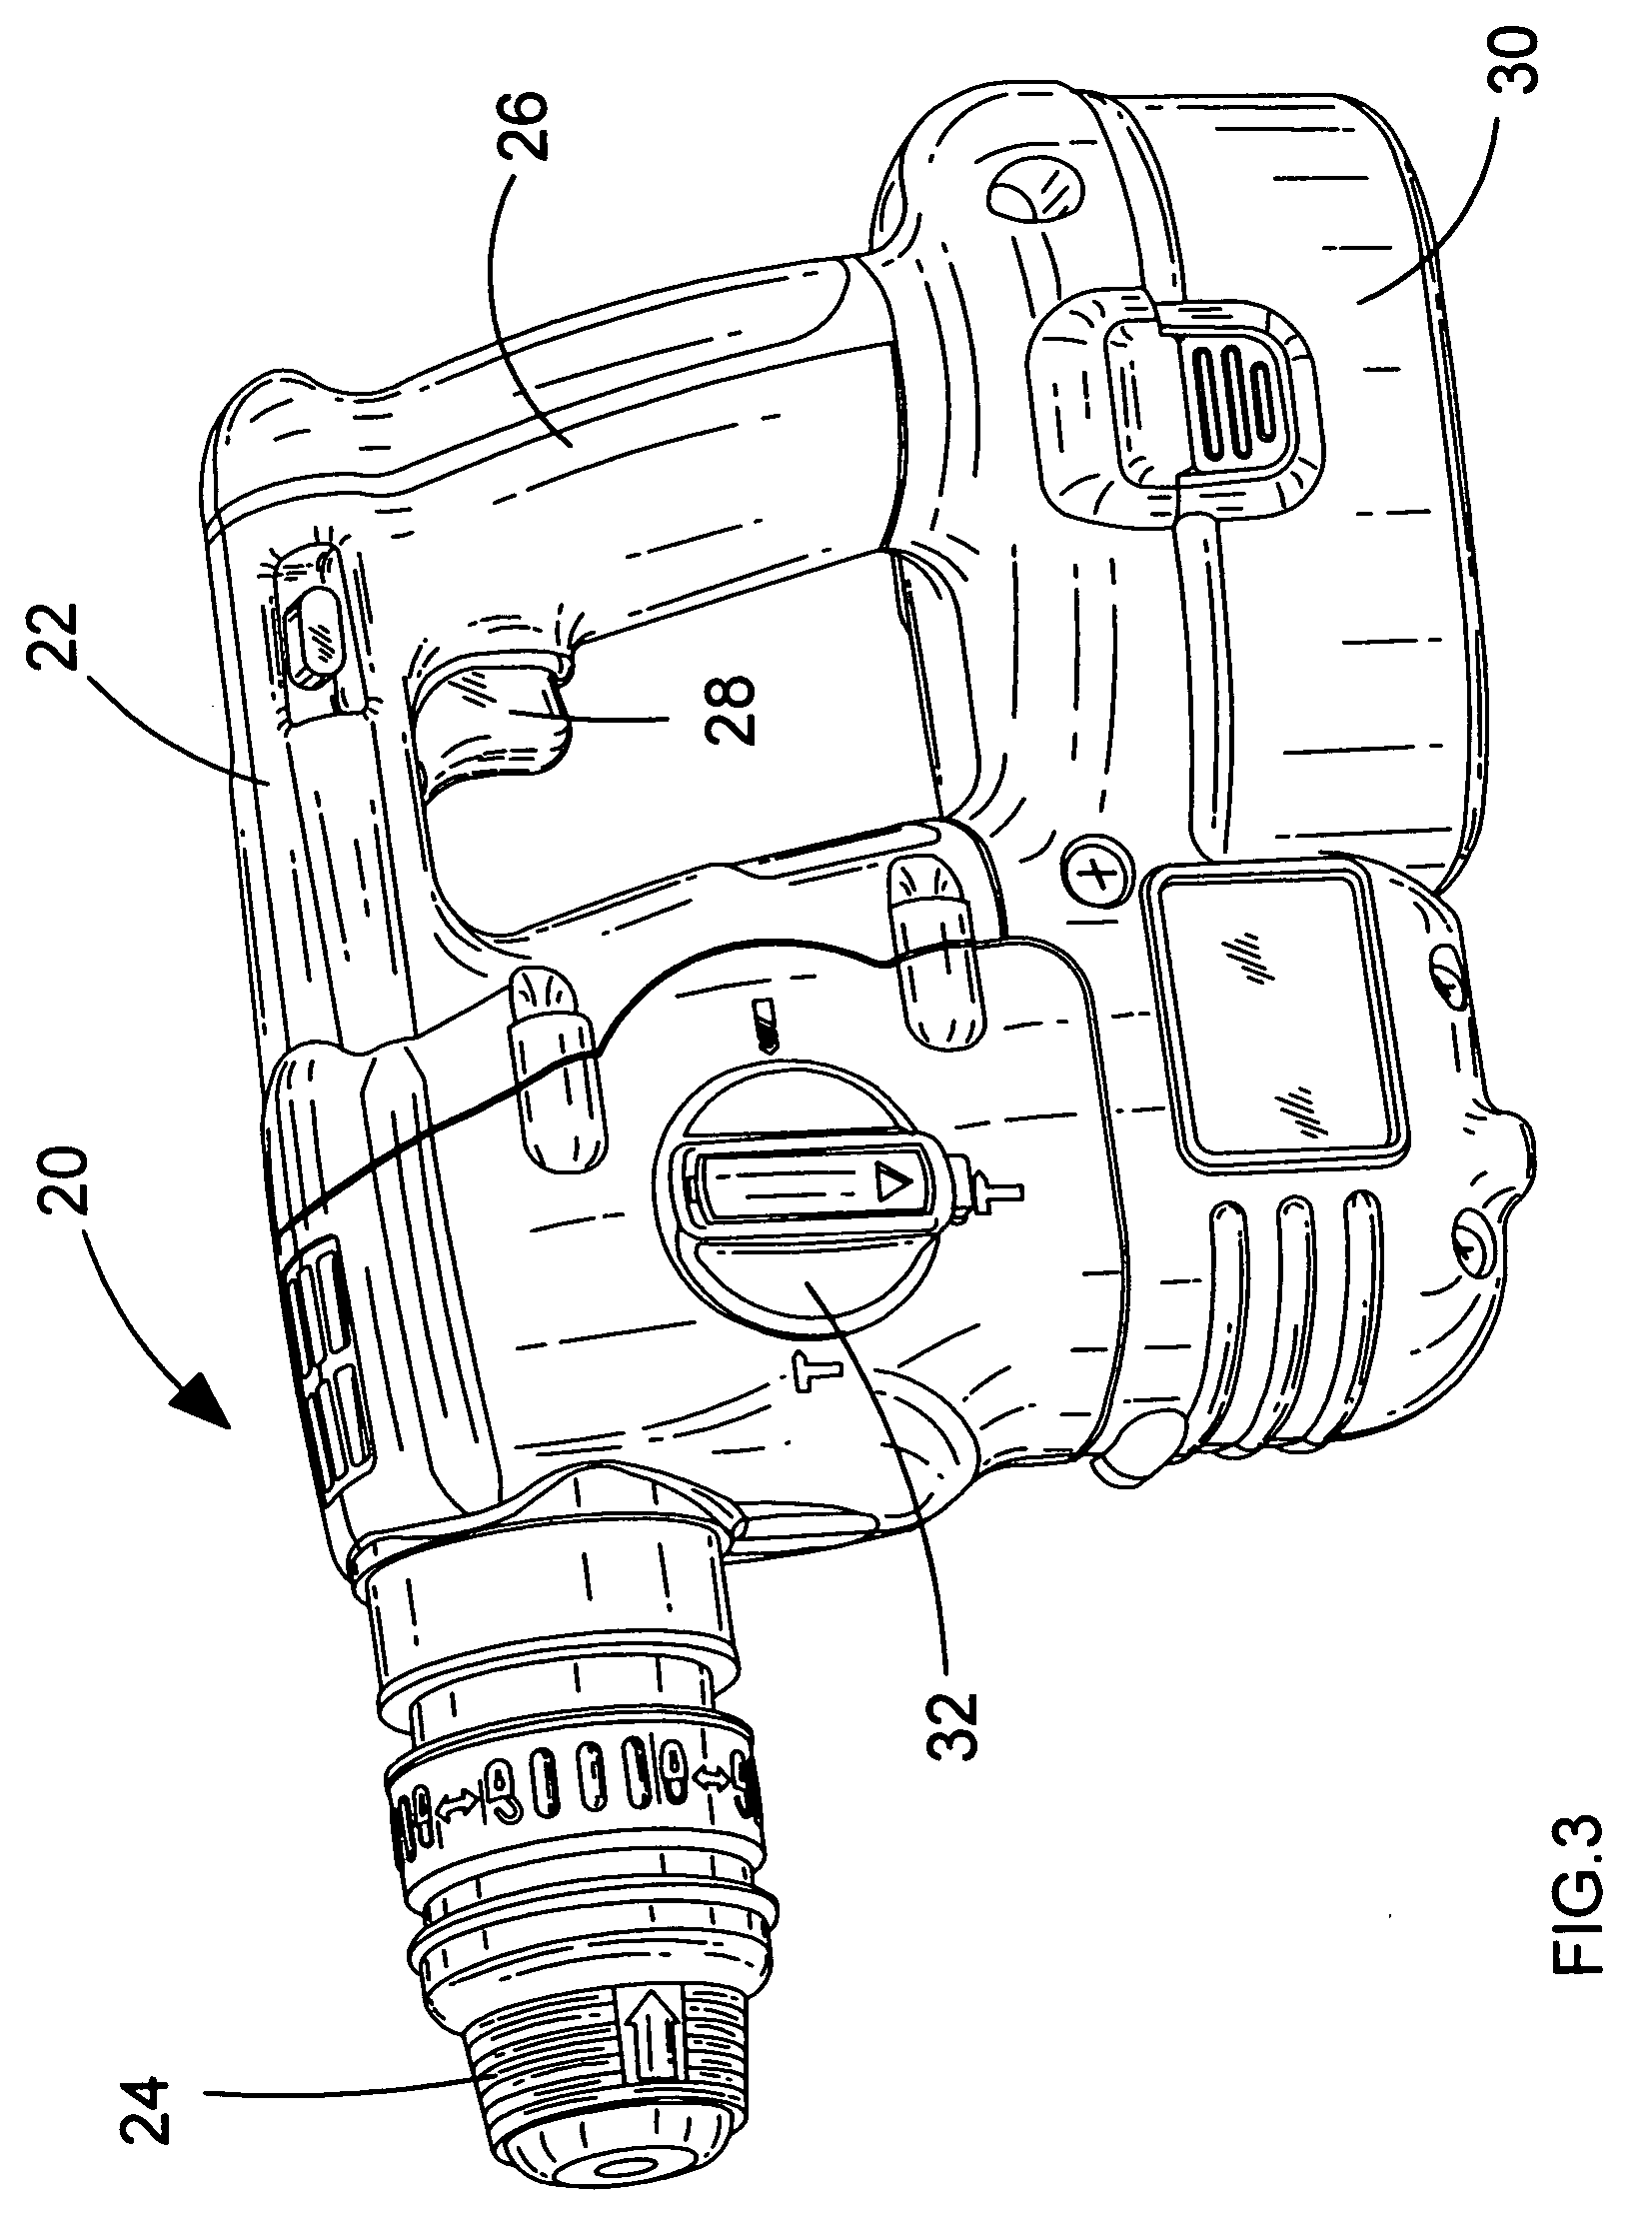 Drive mechanism for a power tool